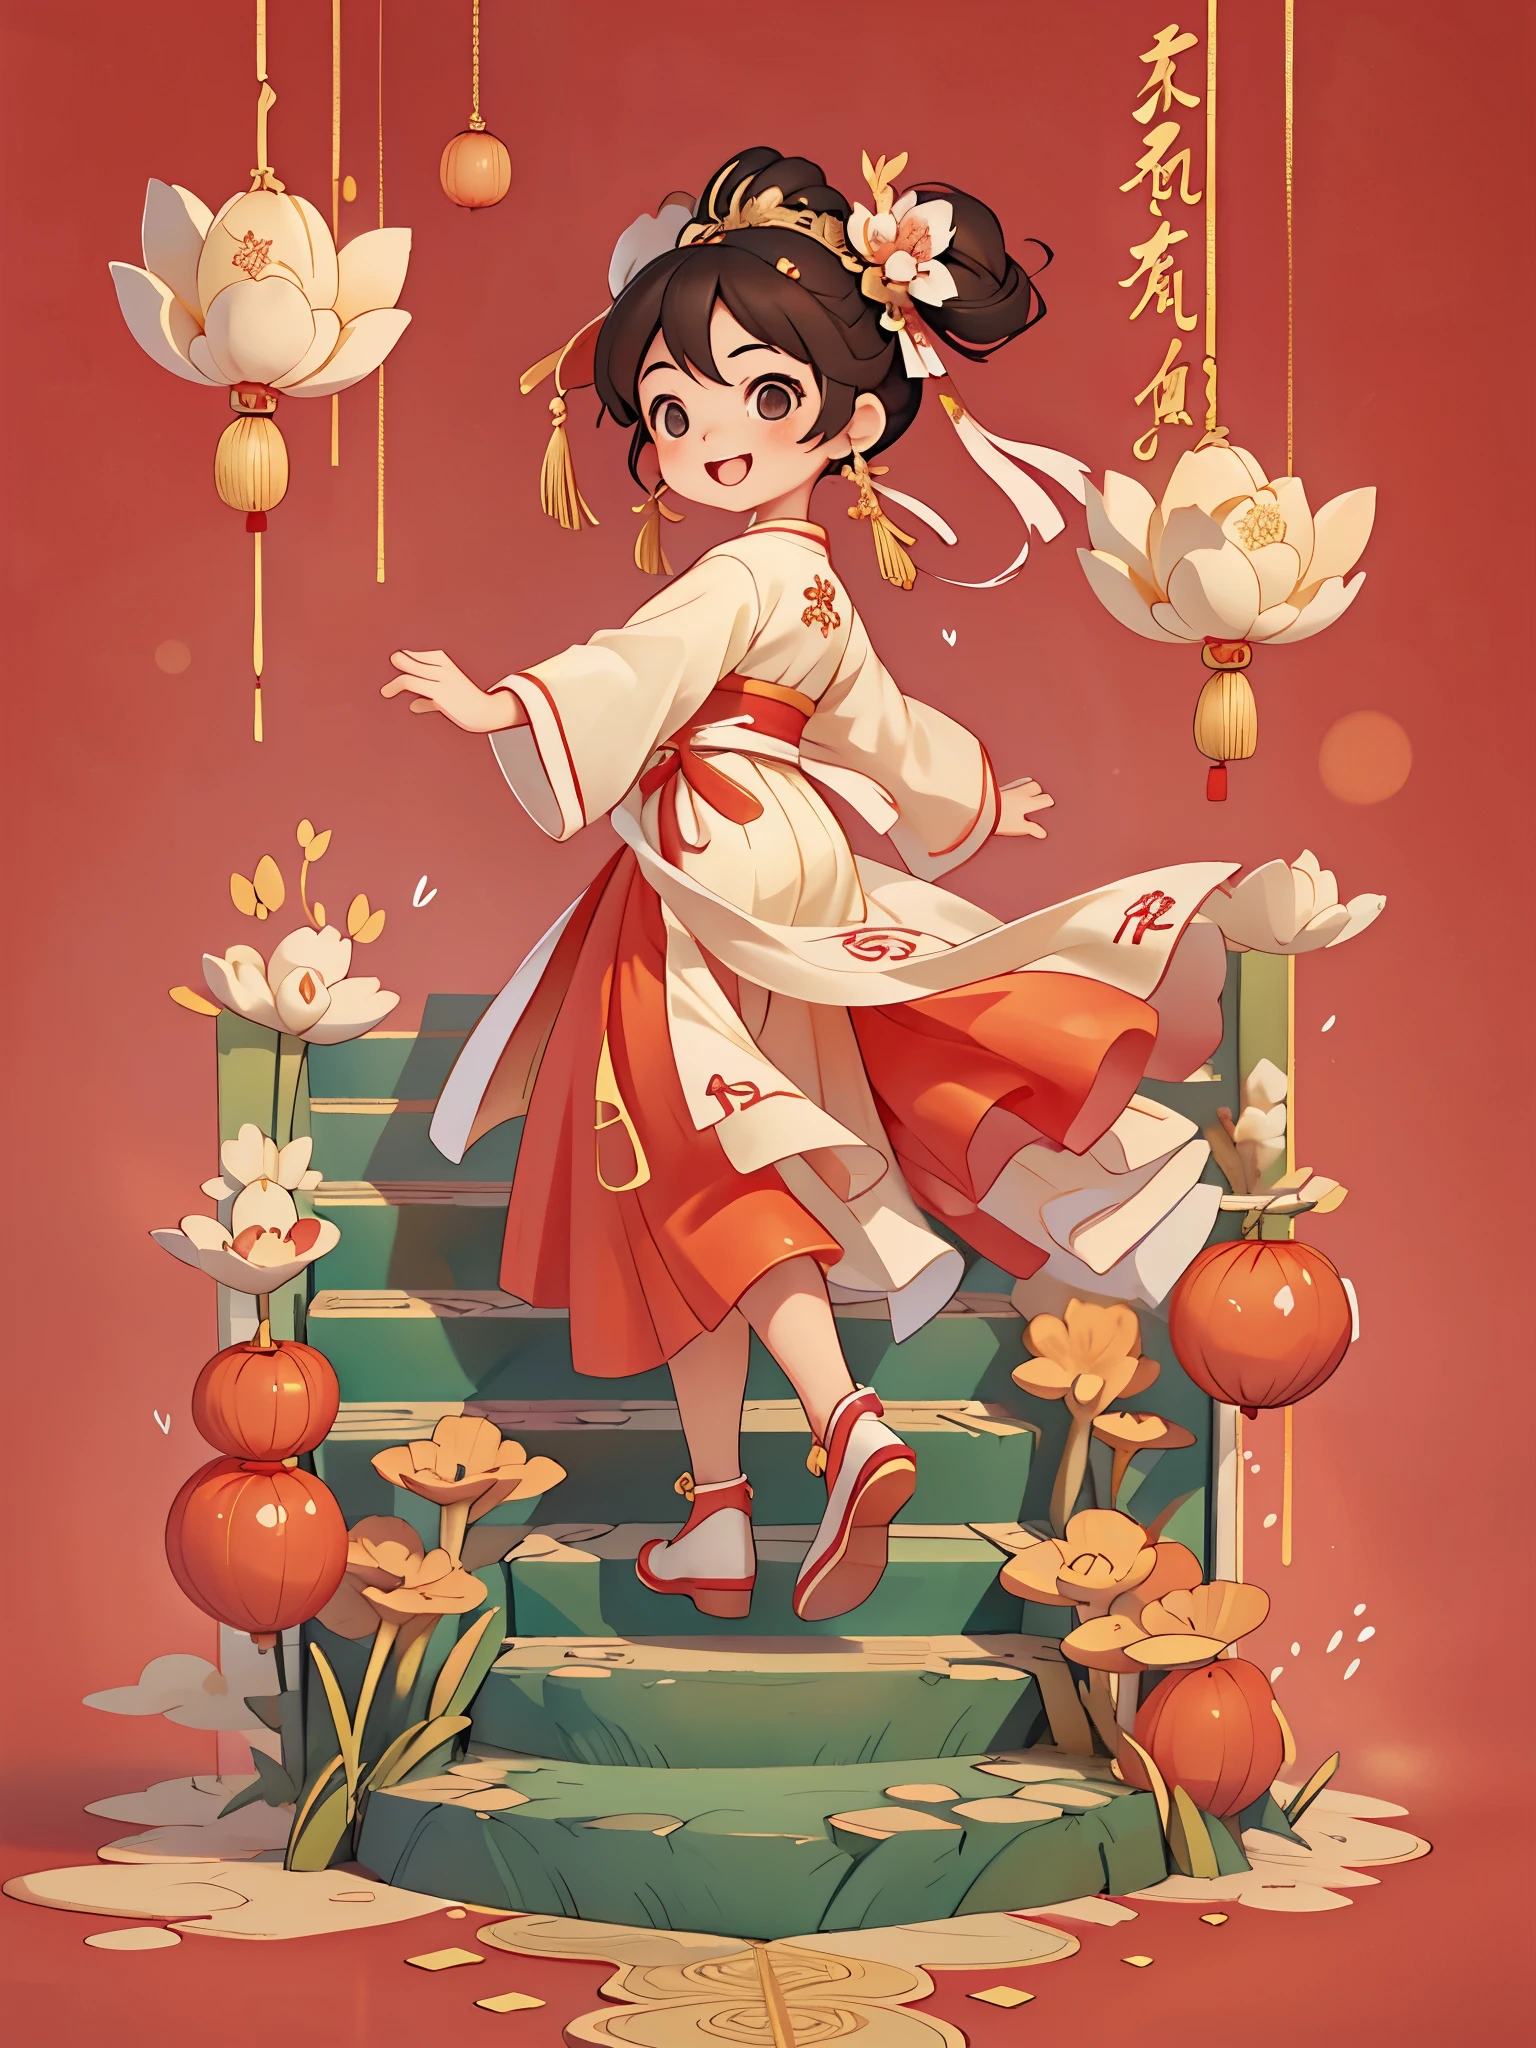 Create a series of Chinese New Year themed greeting cardasterpiece)，(best quality)，(official art)，(Beauty and aesthetics:1.2)，Cute little girl climbing up on the stairs，look back，Smiling happily to the audience，open mouth，The  must be wearing exquisite classical Hanfu，((long skirt))，She has brown twintails，All greeting cards should follow the same Chinese red pattern with a solid color background and be complete within the image, exhibit (whole body: 1.5)，She must have a dark brown round head. Your eyes should be large and expressive，long eyelashes and rosy cheeks，Smile is delicate and white，elegant movements，Bonito Advanced Certificate, Hair texture and detailake the picture more Chinese style.